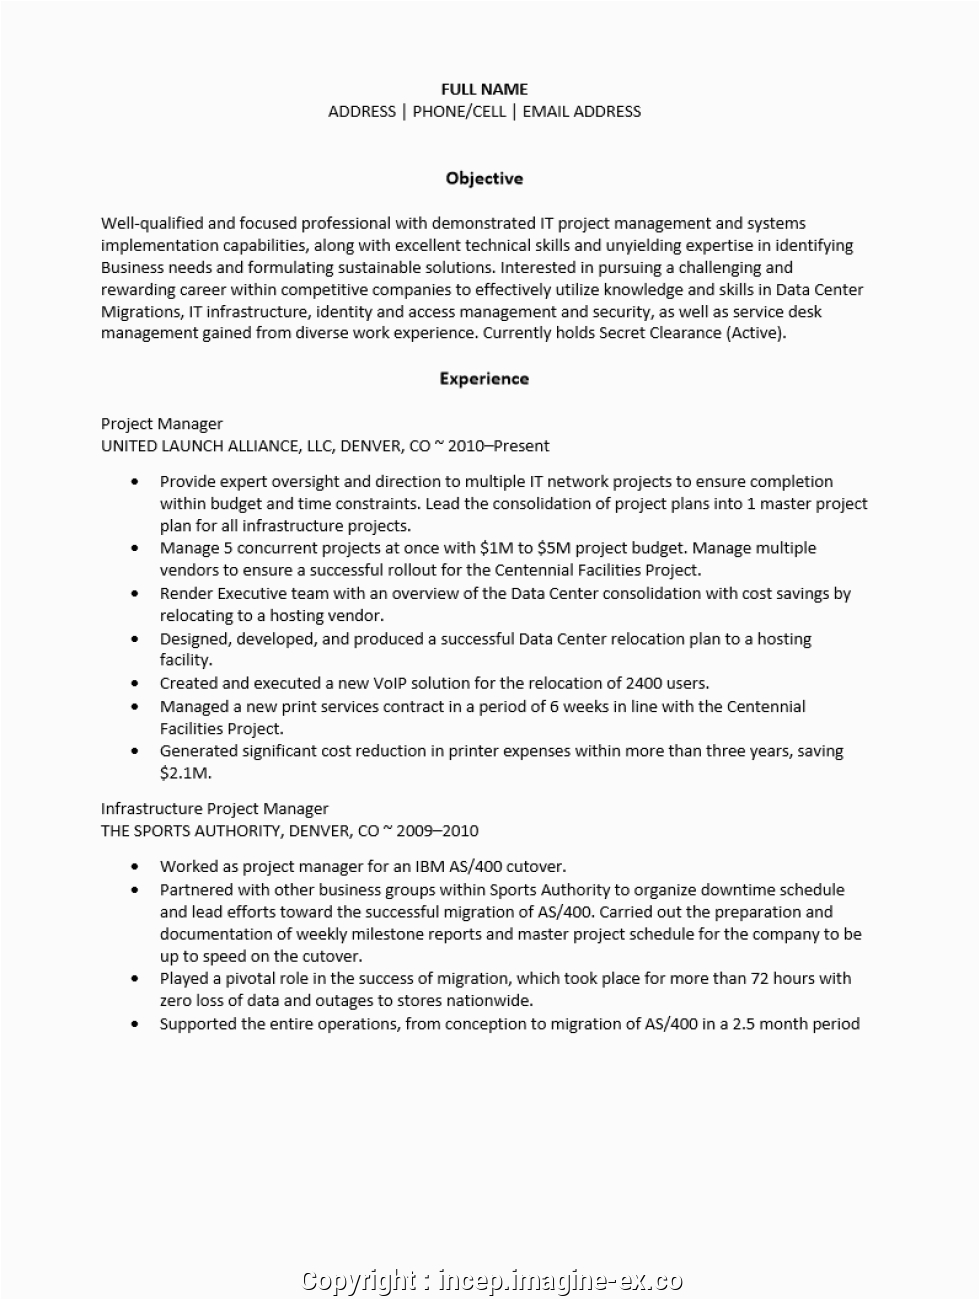 create infrastructure project manager resume sample